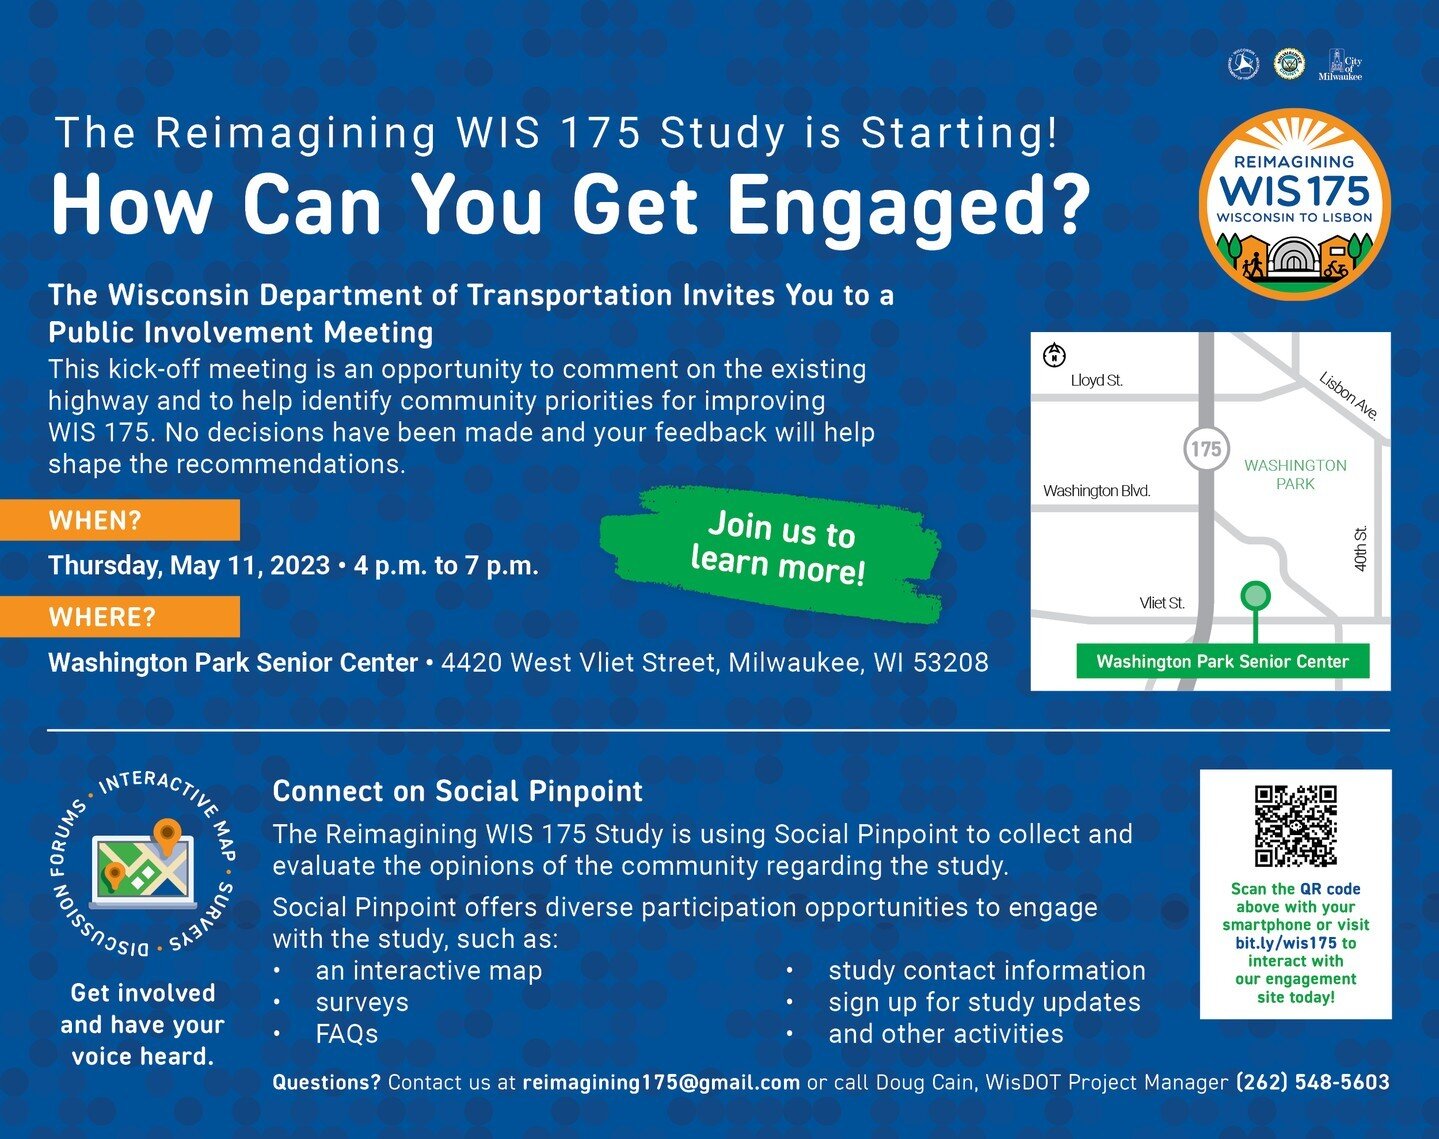 It's time to reimagine WIS175. This first kickoff meeting will look at existing conditions of the highway, you can help identify community priorities for improvements. Learn more and sign up for updates at https://graef.mysocialpinpoint.com/wisdot175